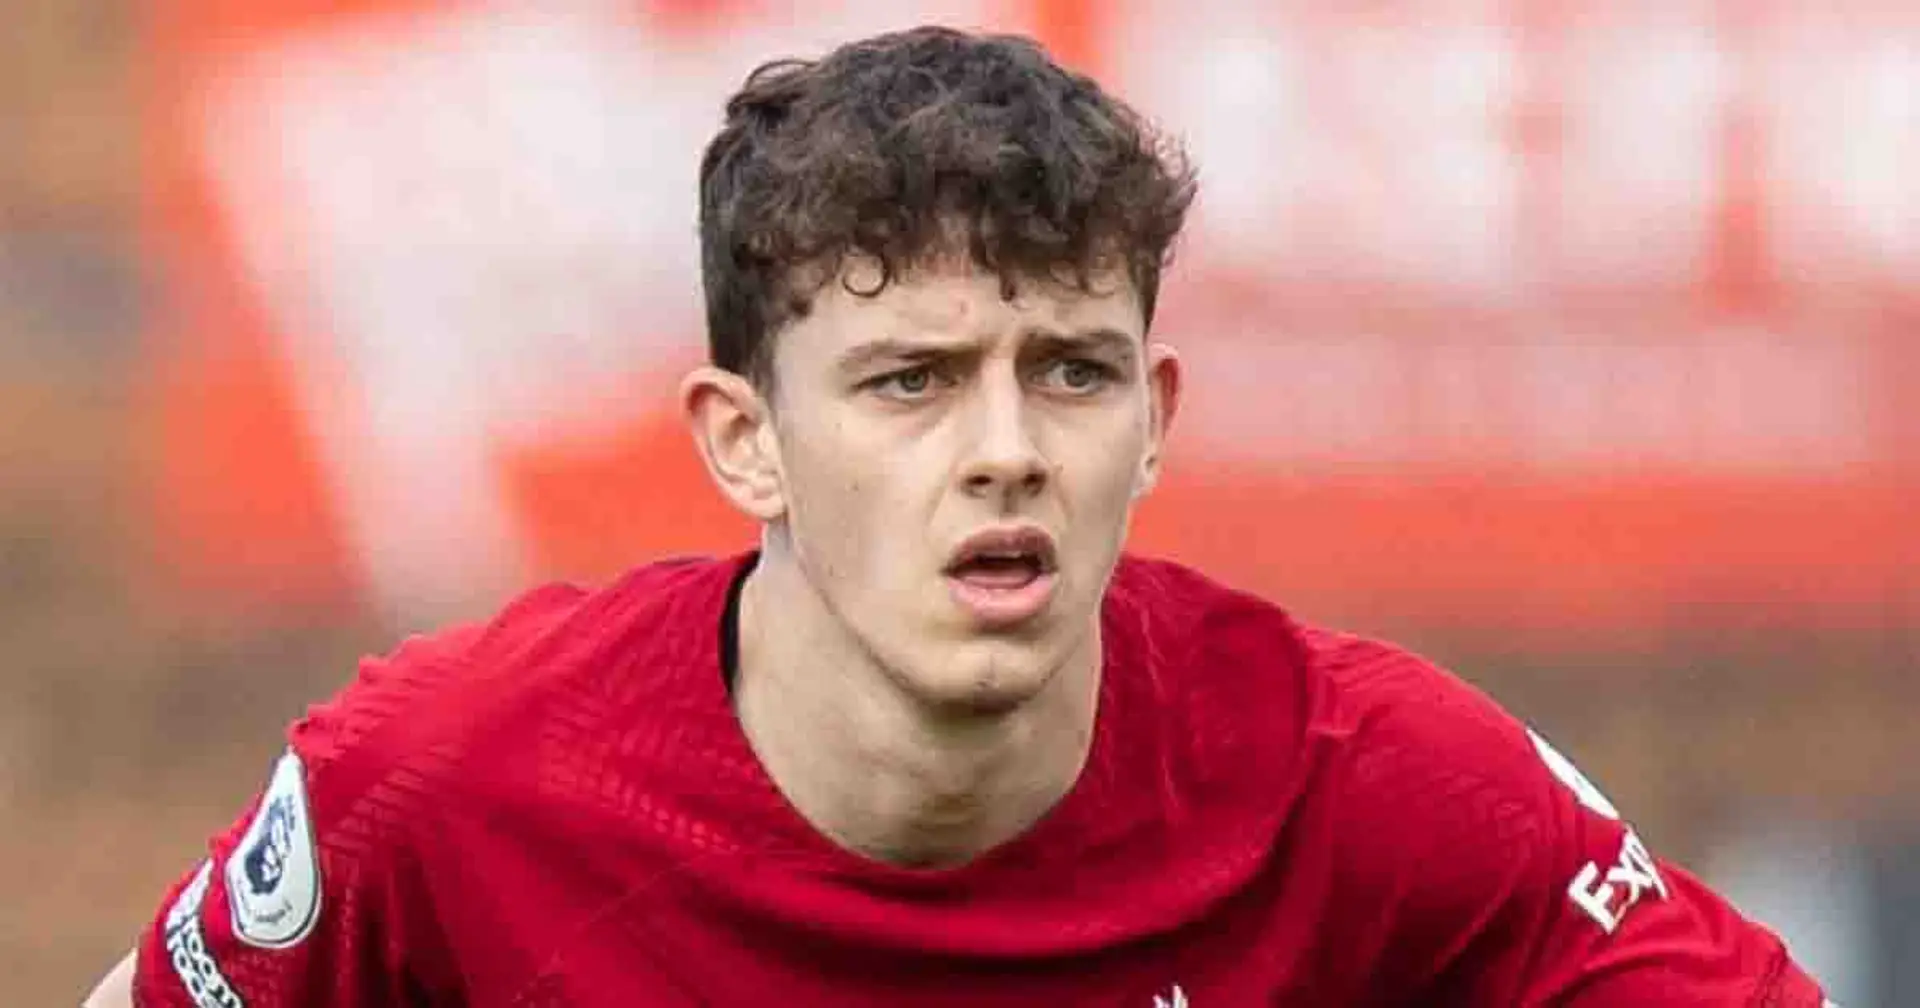 Could Owen Beck make Liverpool debut vs Arsenal after being recalled from loan?